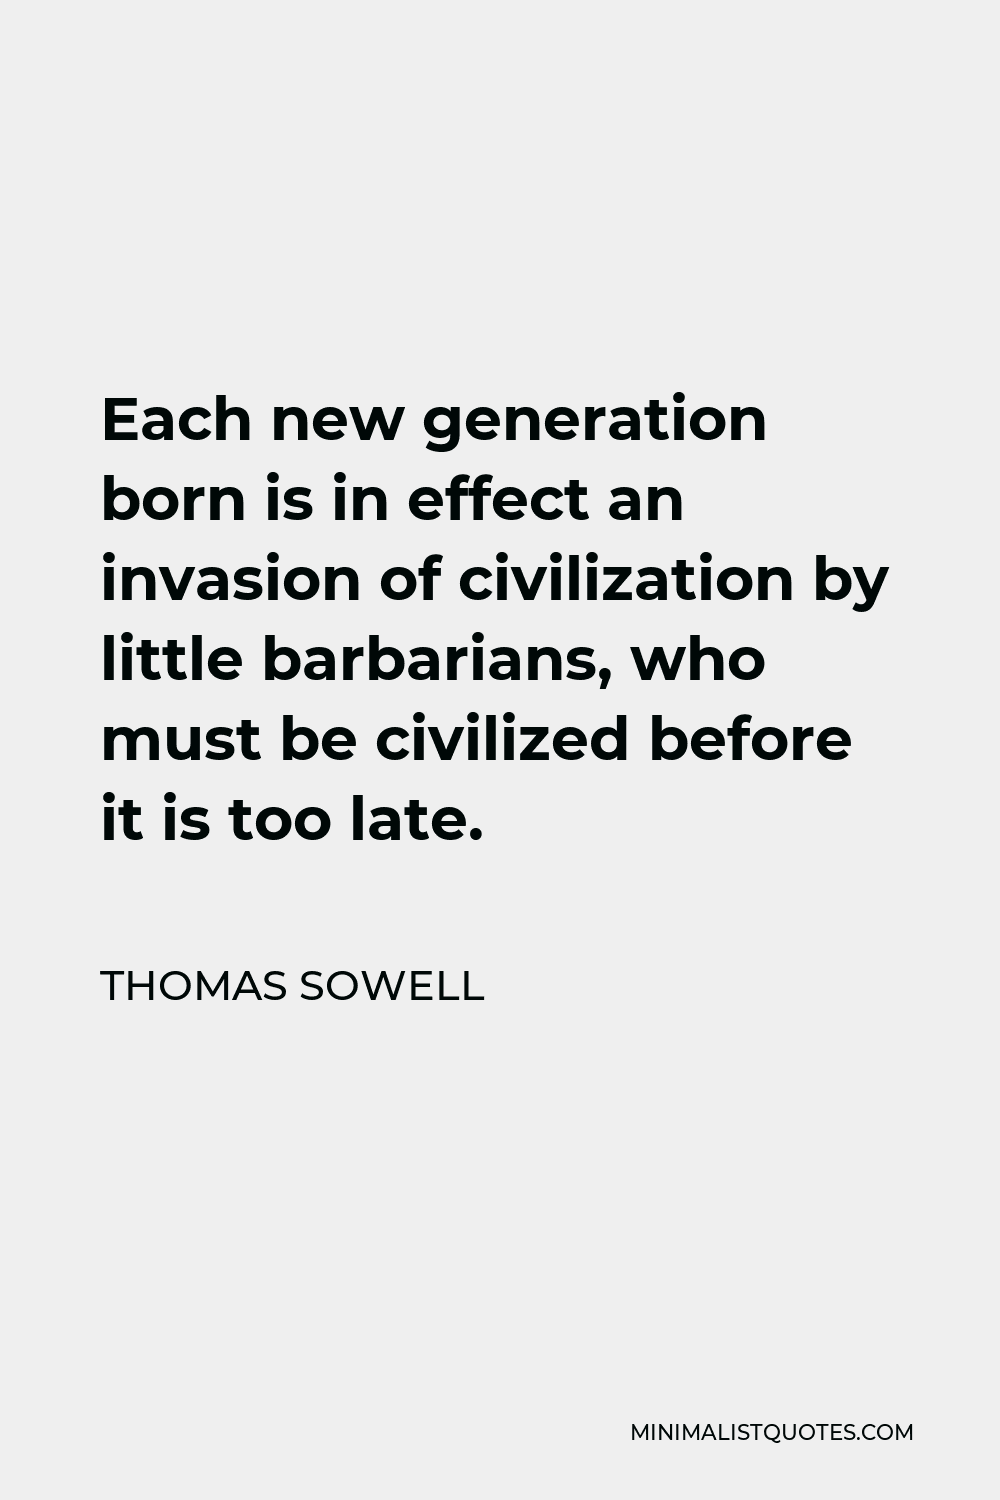 Thomas Sowell Quote - Each new generation born is in effect an invasion of civilization by little barbarians, who must be civilized before it is too late.